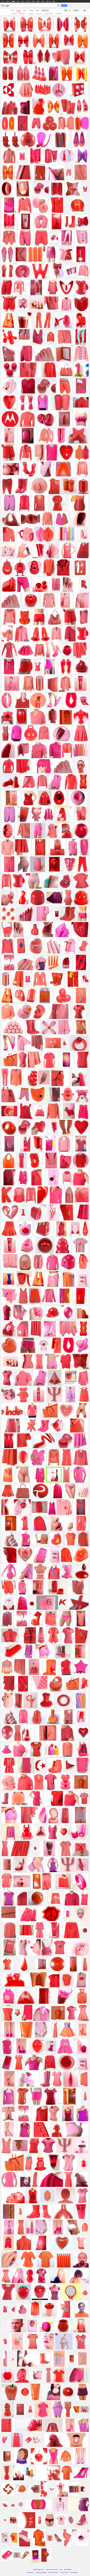 unrelated image search results show lots of different pink bits